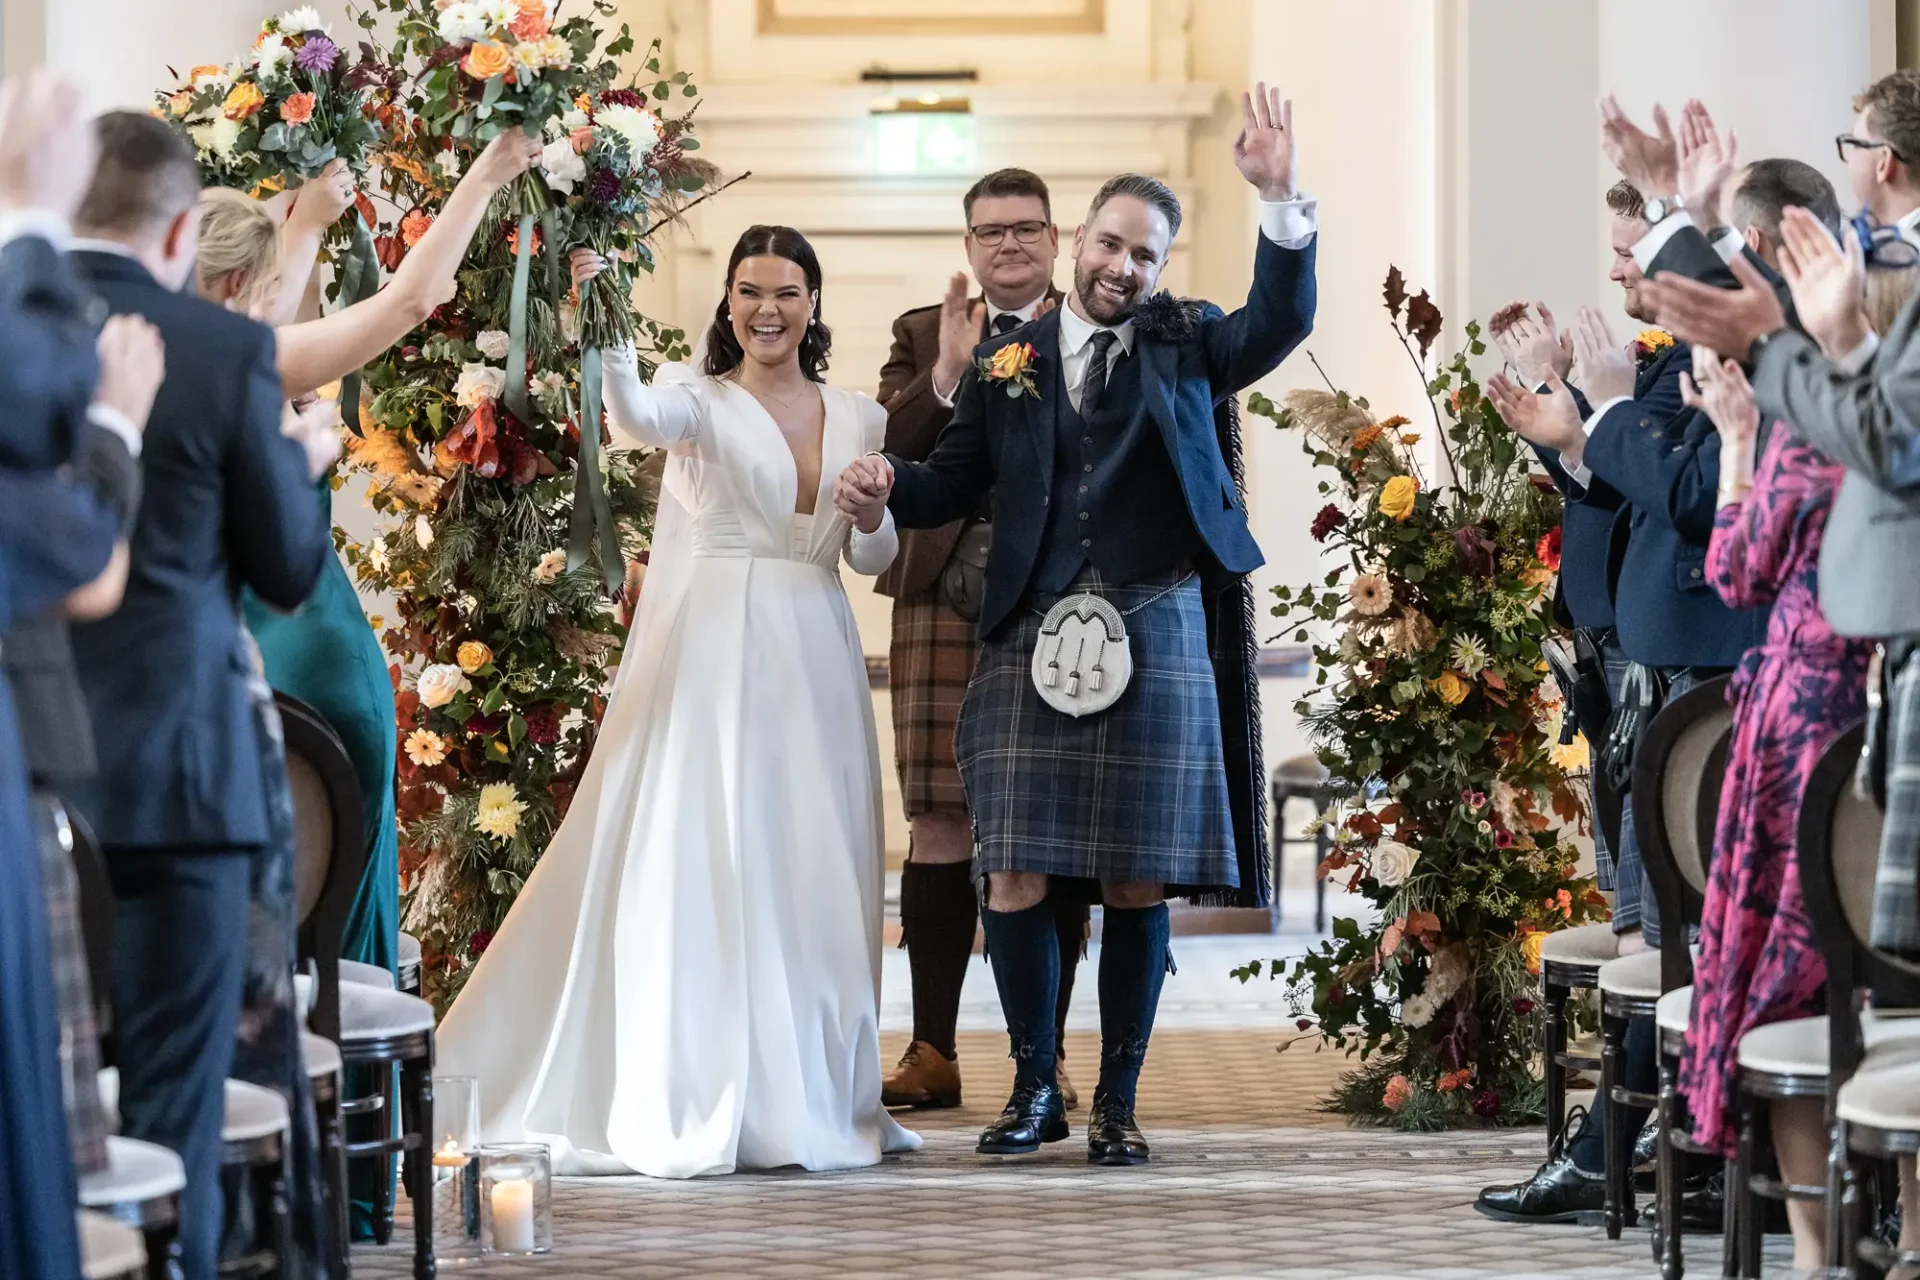 Bride in a white dress and groom in a kilt walk down the aisle, smiling, while guests applaud, surrounded by floral decorations.